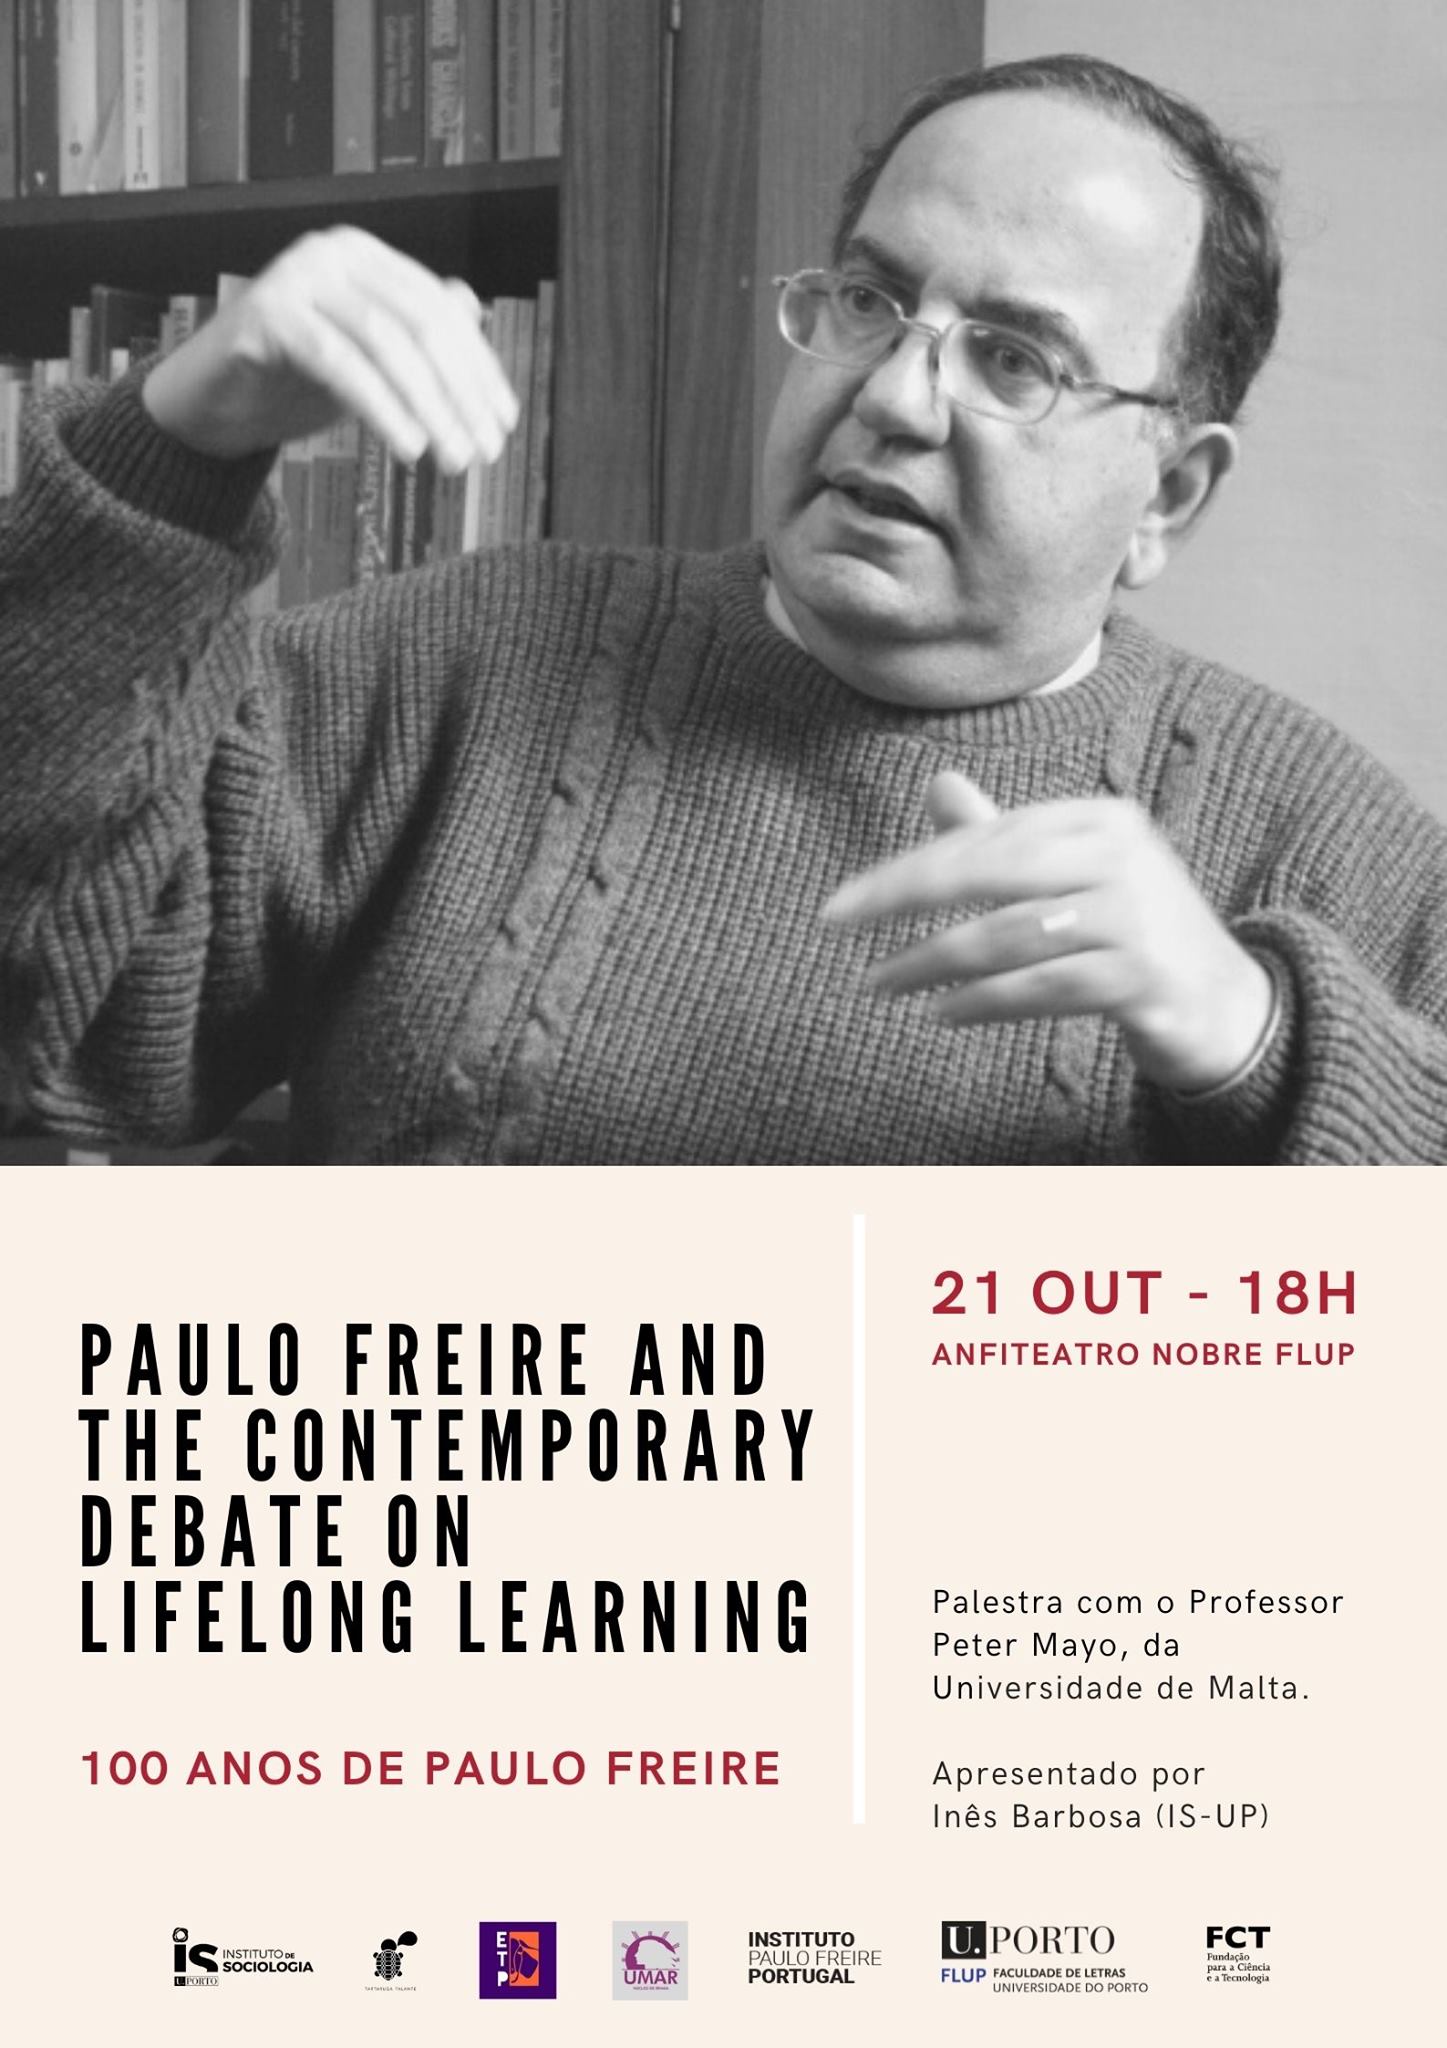 Paulo Freire and the Contemporary Debate on Lifelong Learning | Palestra com Peter Mayo